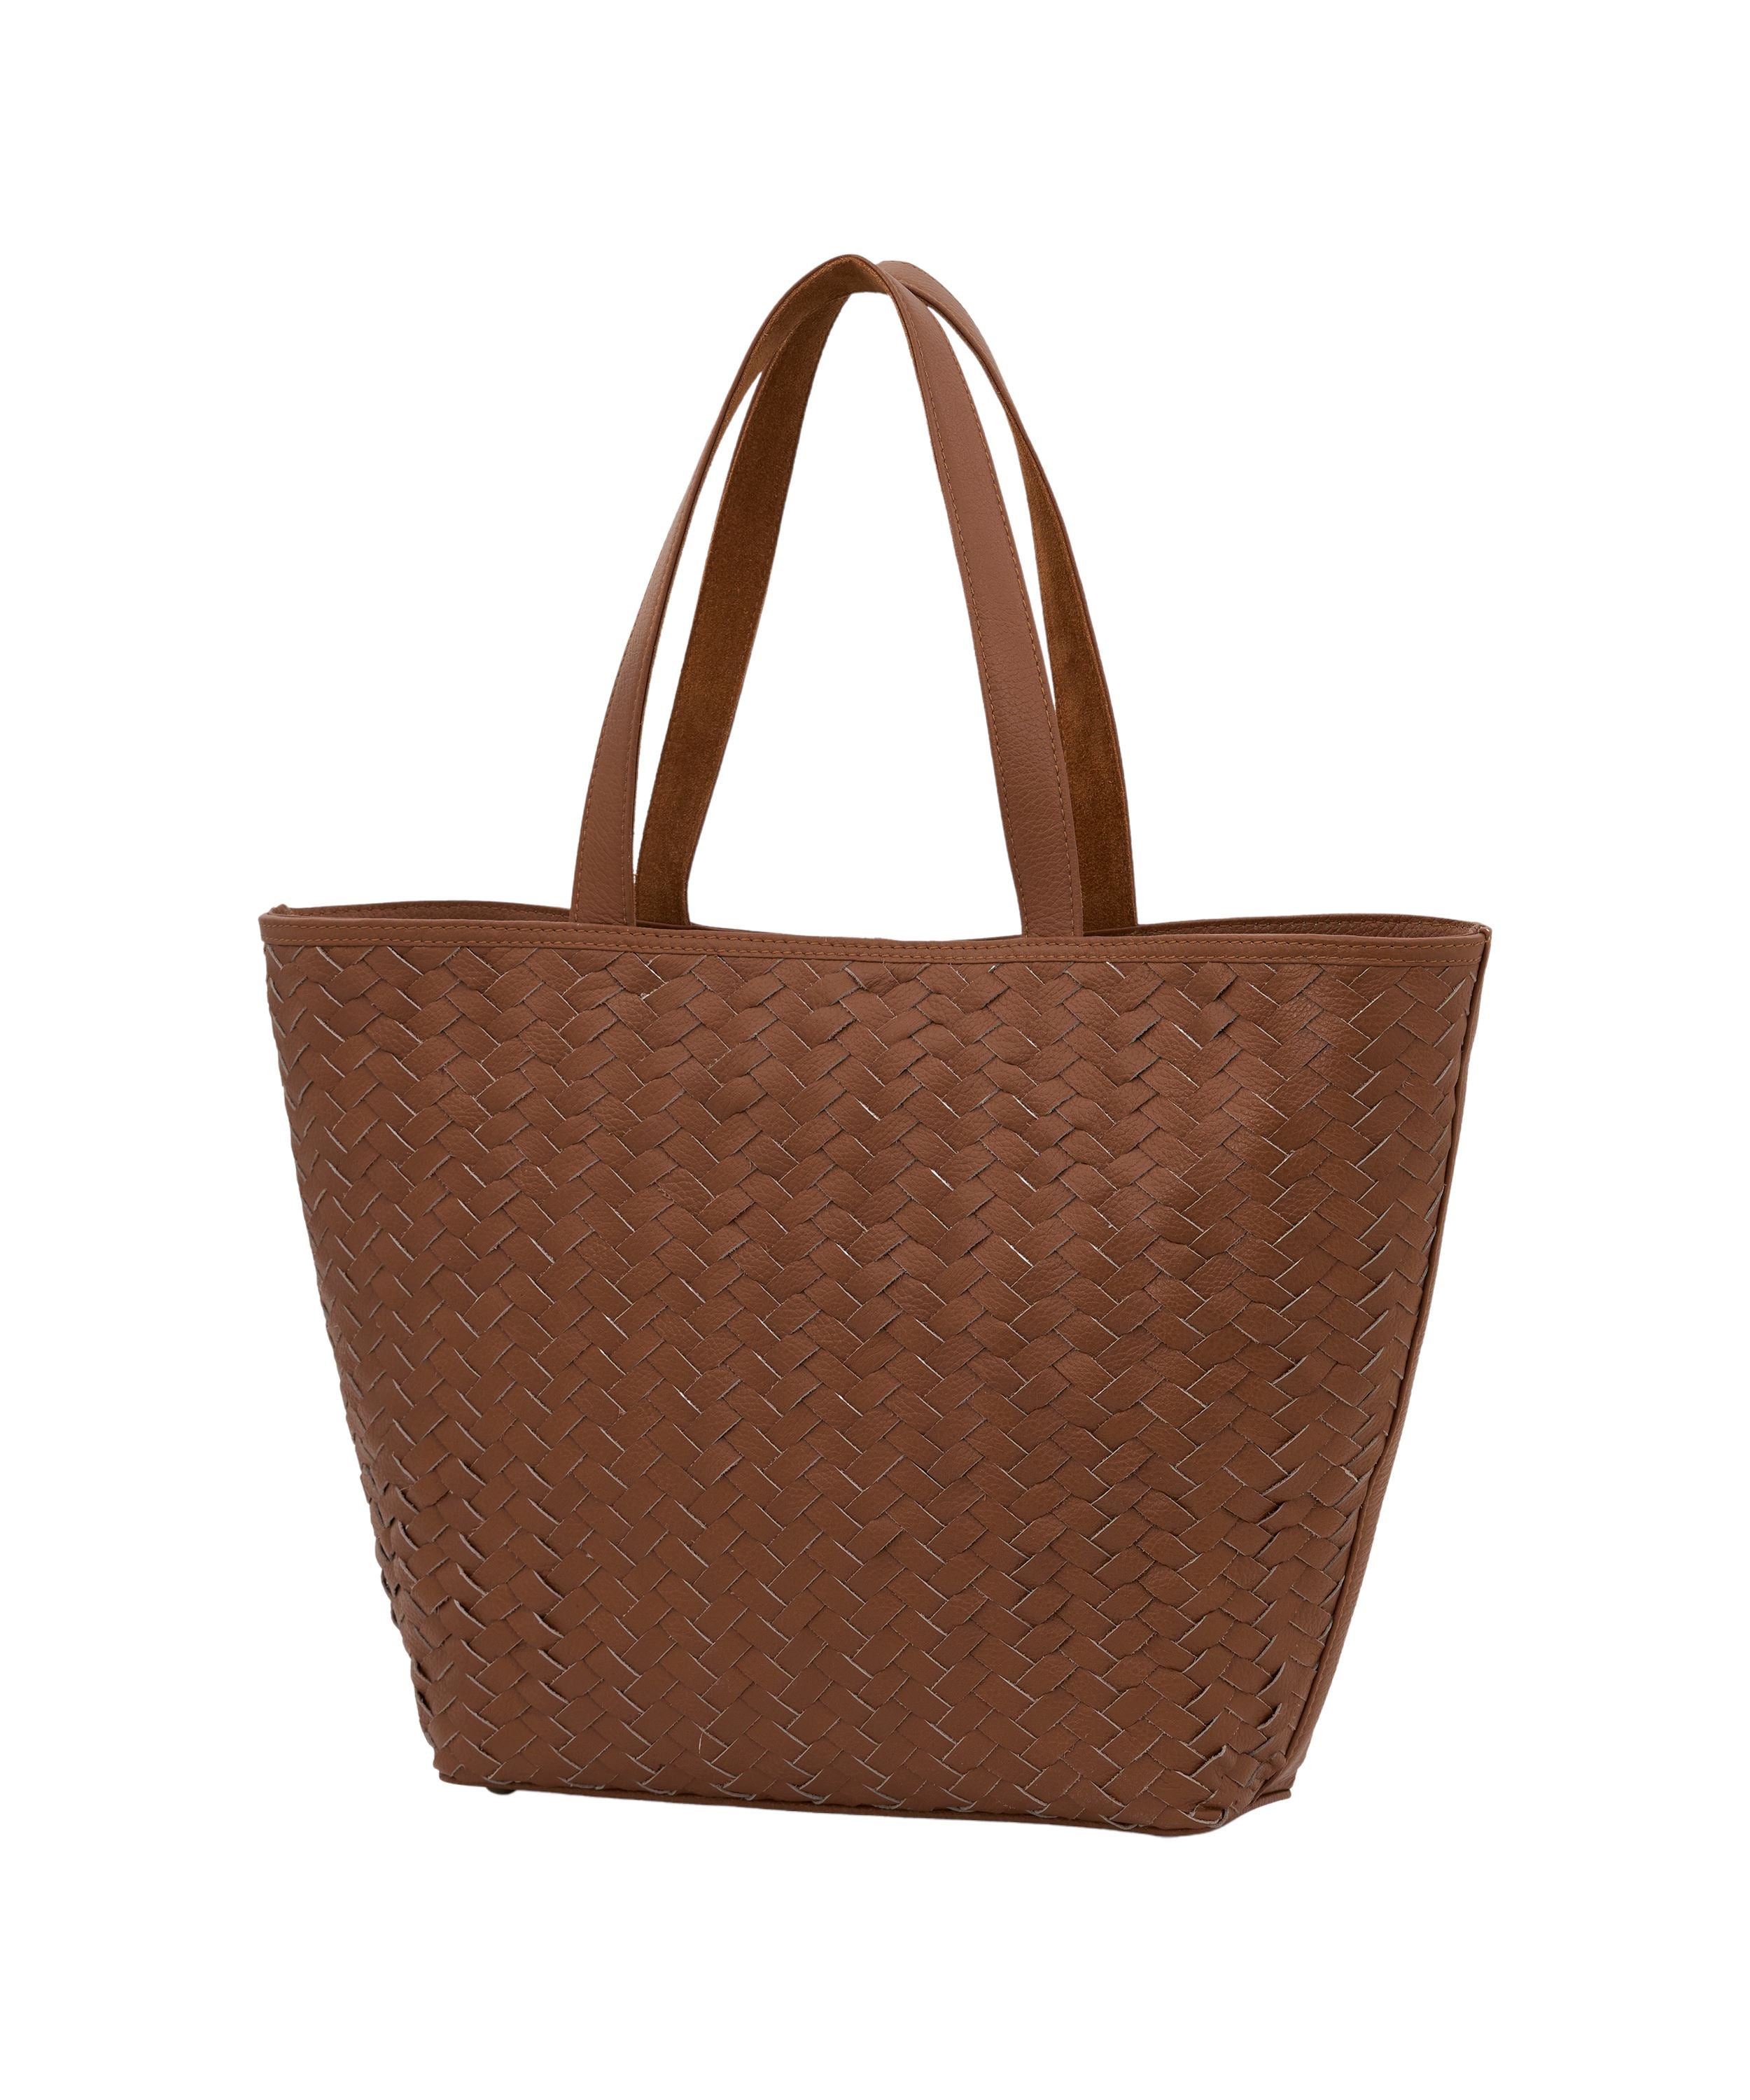 Woven Wonder Carryall in Distressed Tan